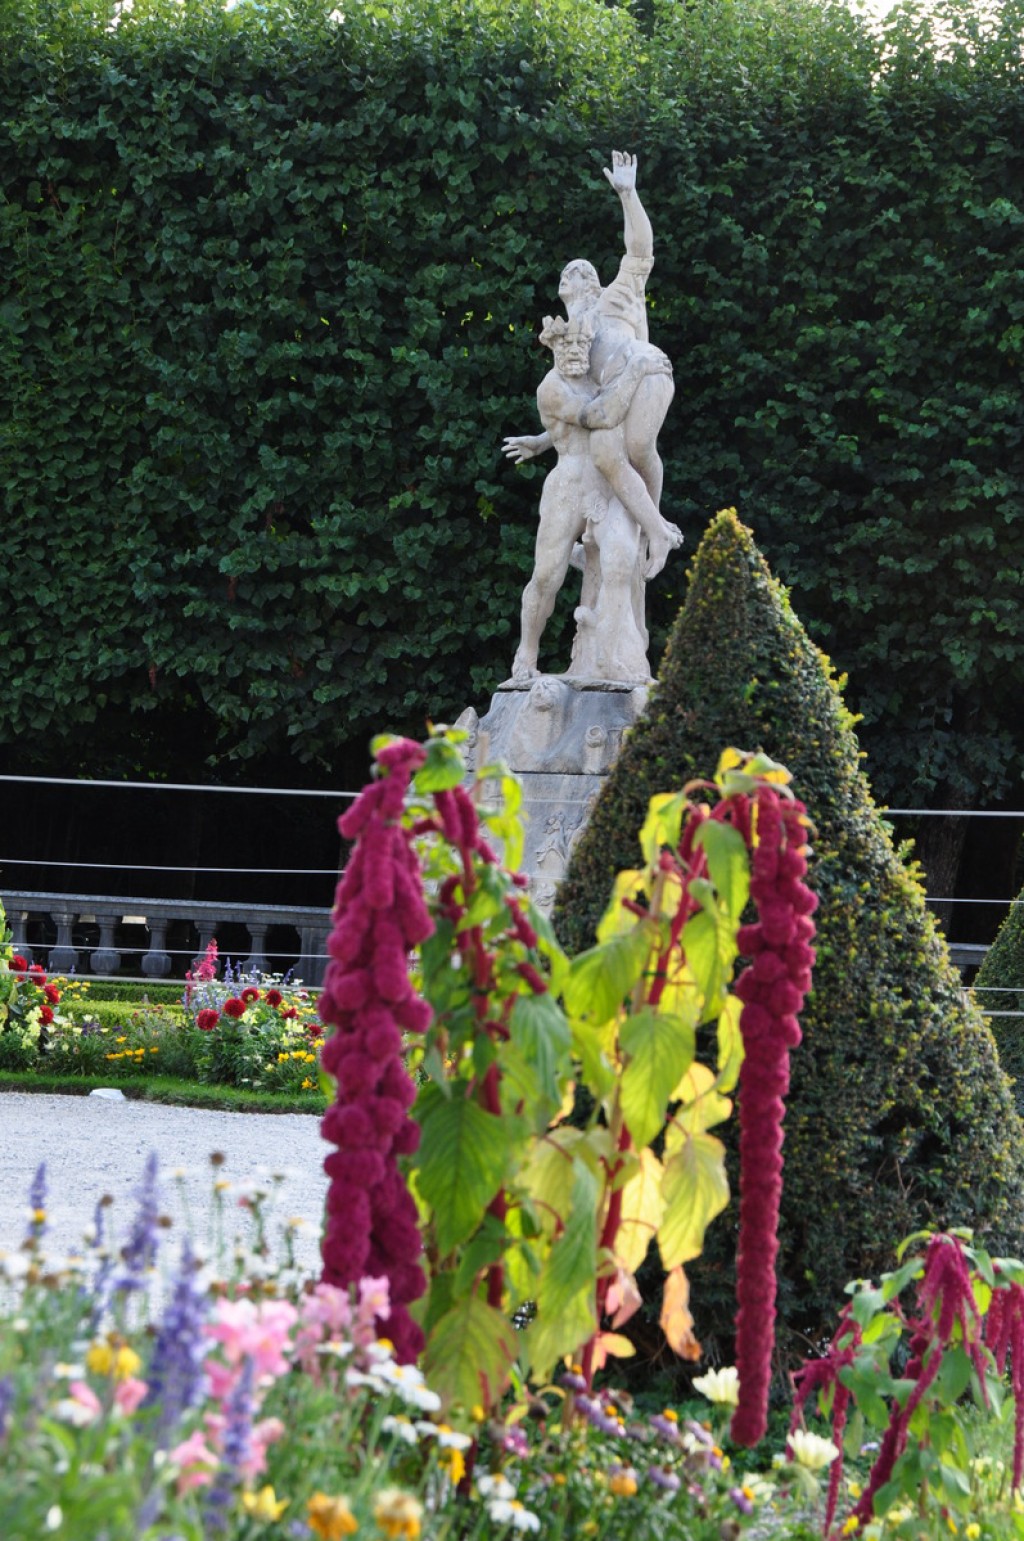 The gardens of Mirabellgarten are a beautiful set of gardens next to Mirabell Palace in Salzburg.